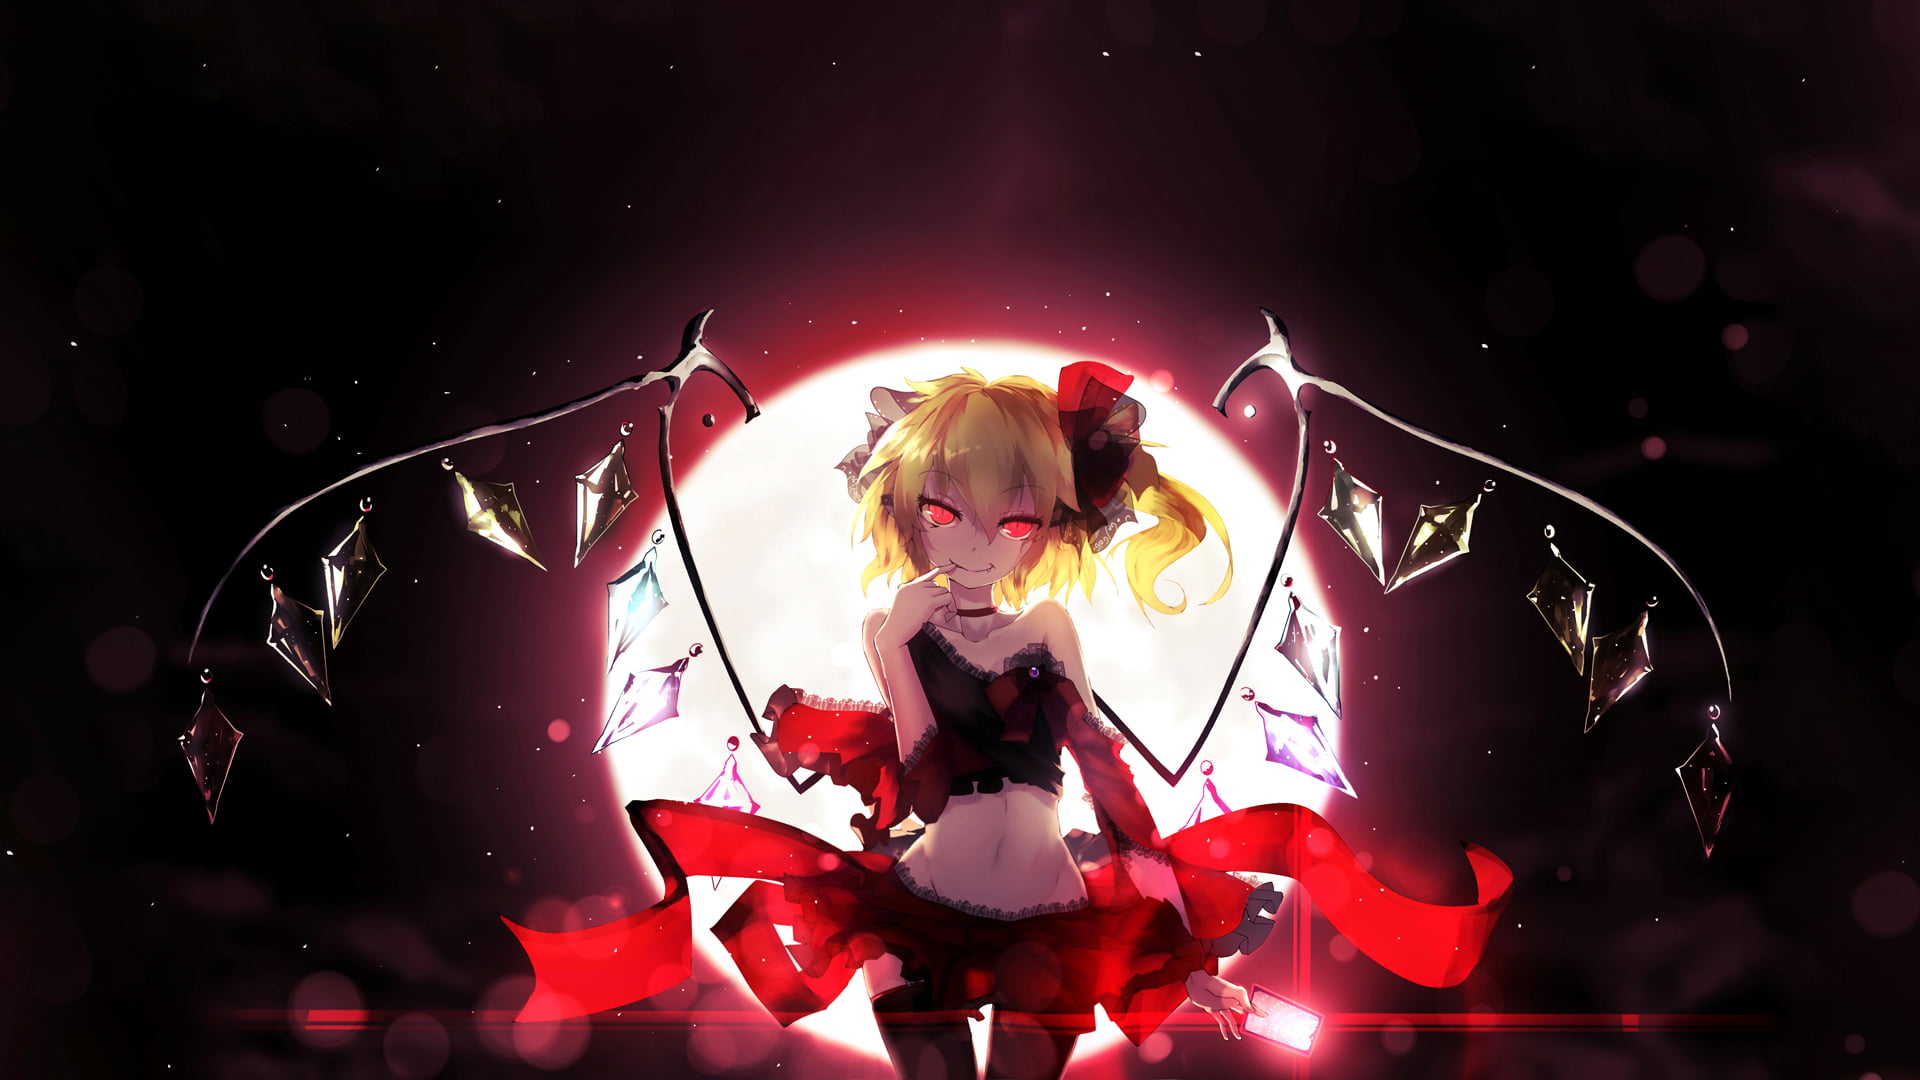 yellow-haired female anime character wallpaper, Flandre Scarlet, Touhou, Moon